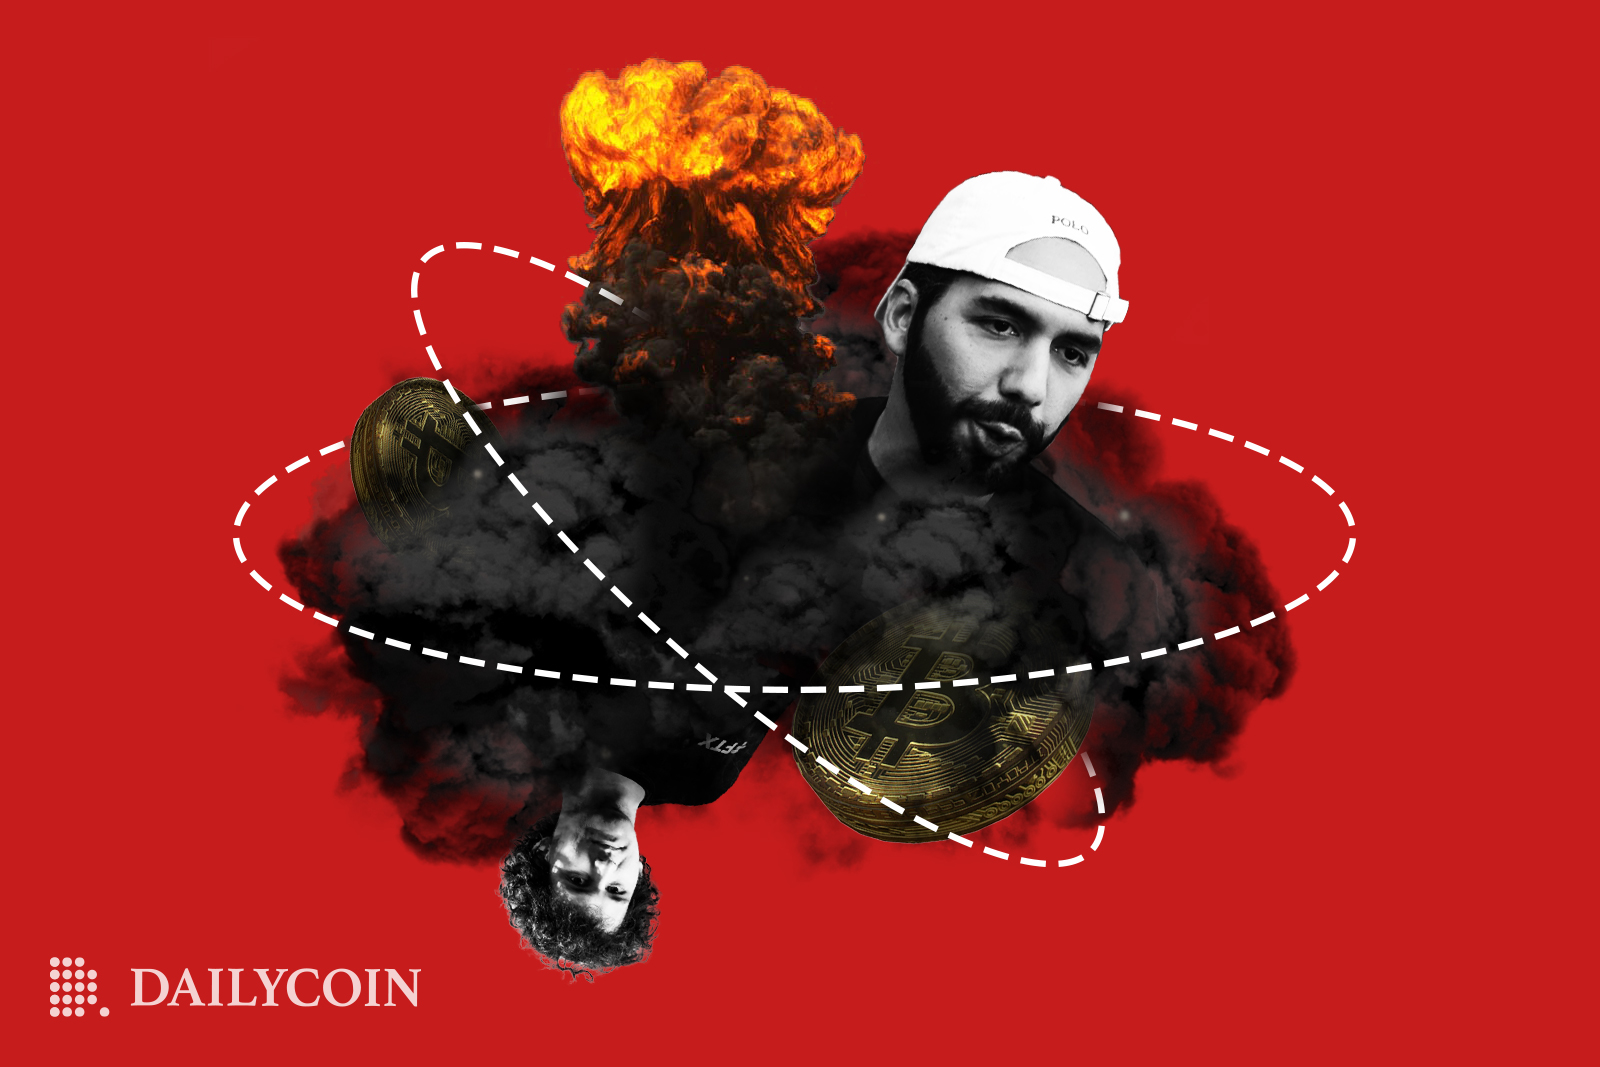 Did-El-Salvador’s-Bitcoin-(BTC)-Holdings-Get-Caught-Up-In-The-FTX-Mess_fight_crisis_on-fire_bang_blow-up_smoke_red_social